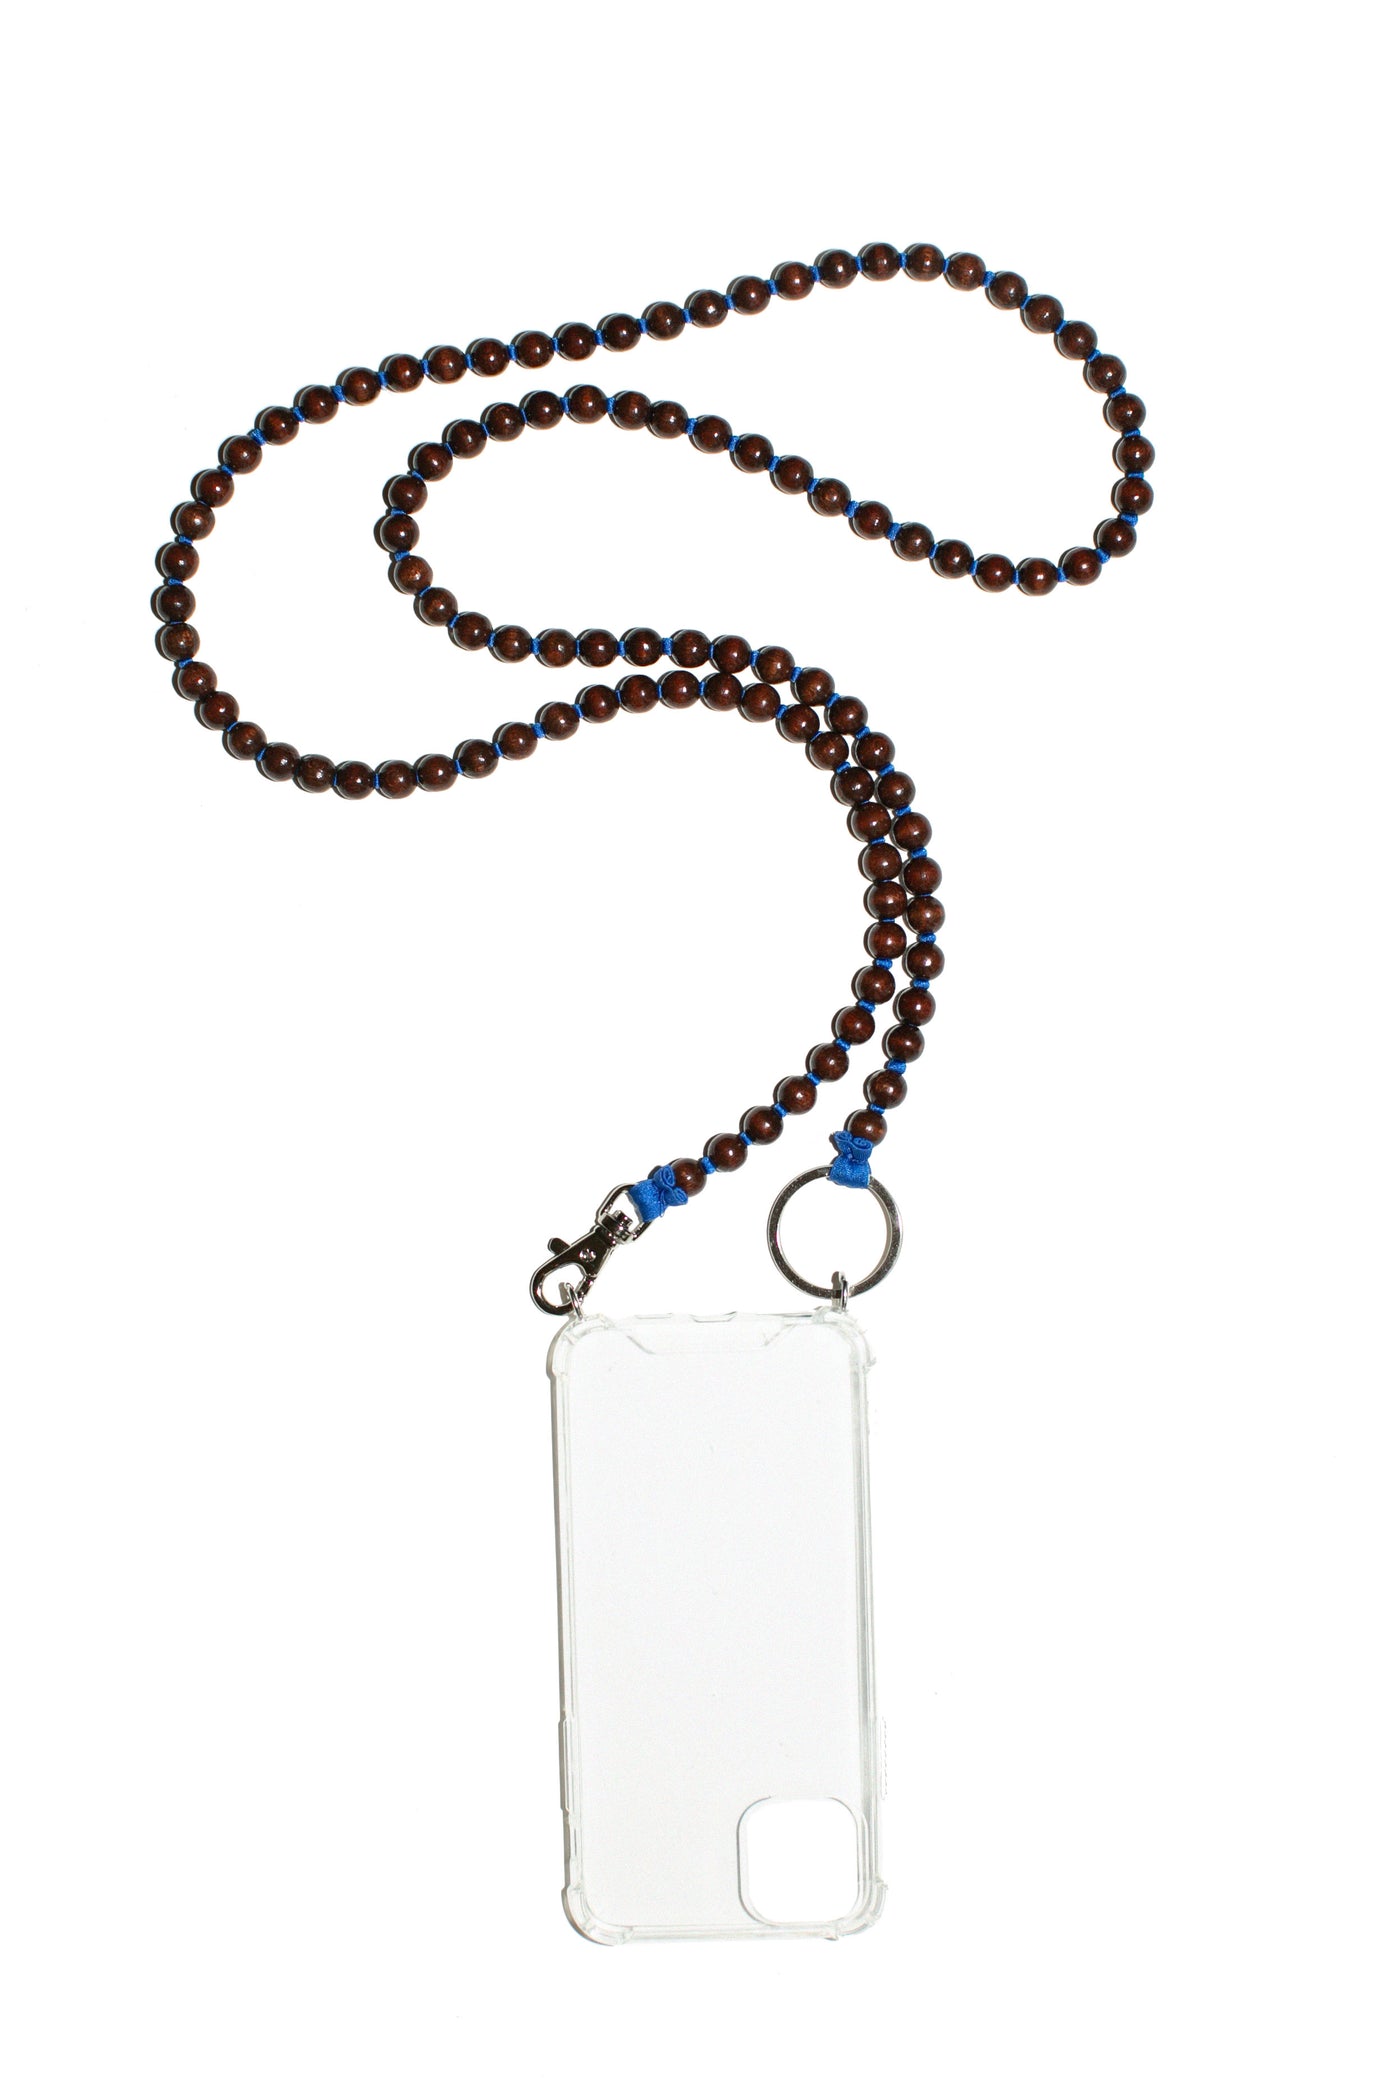 Brown Bead with Blue Thread Handykette Iphone Necklace